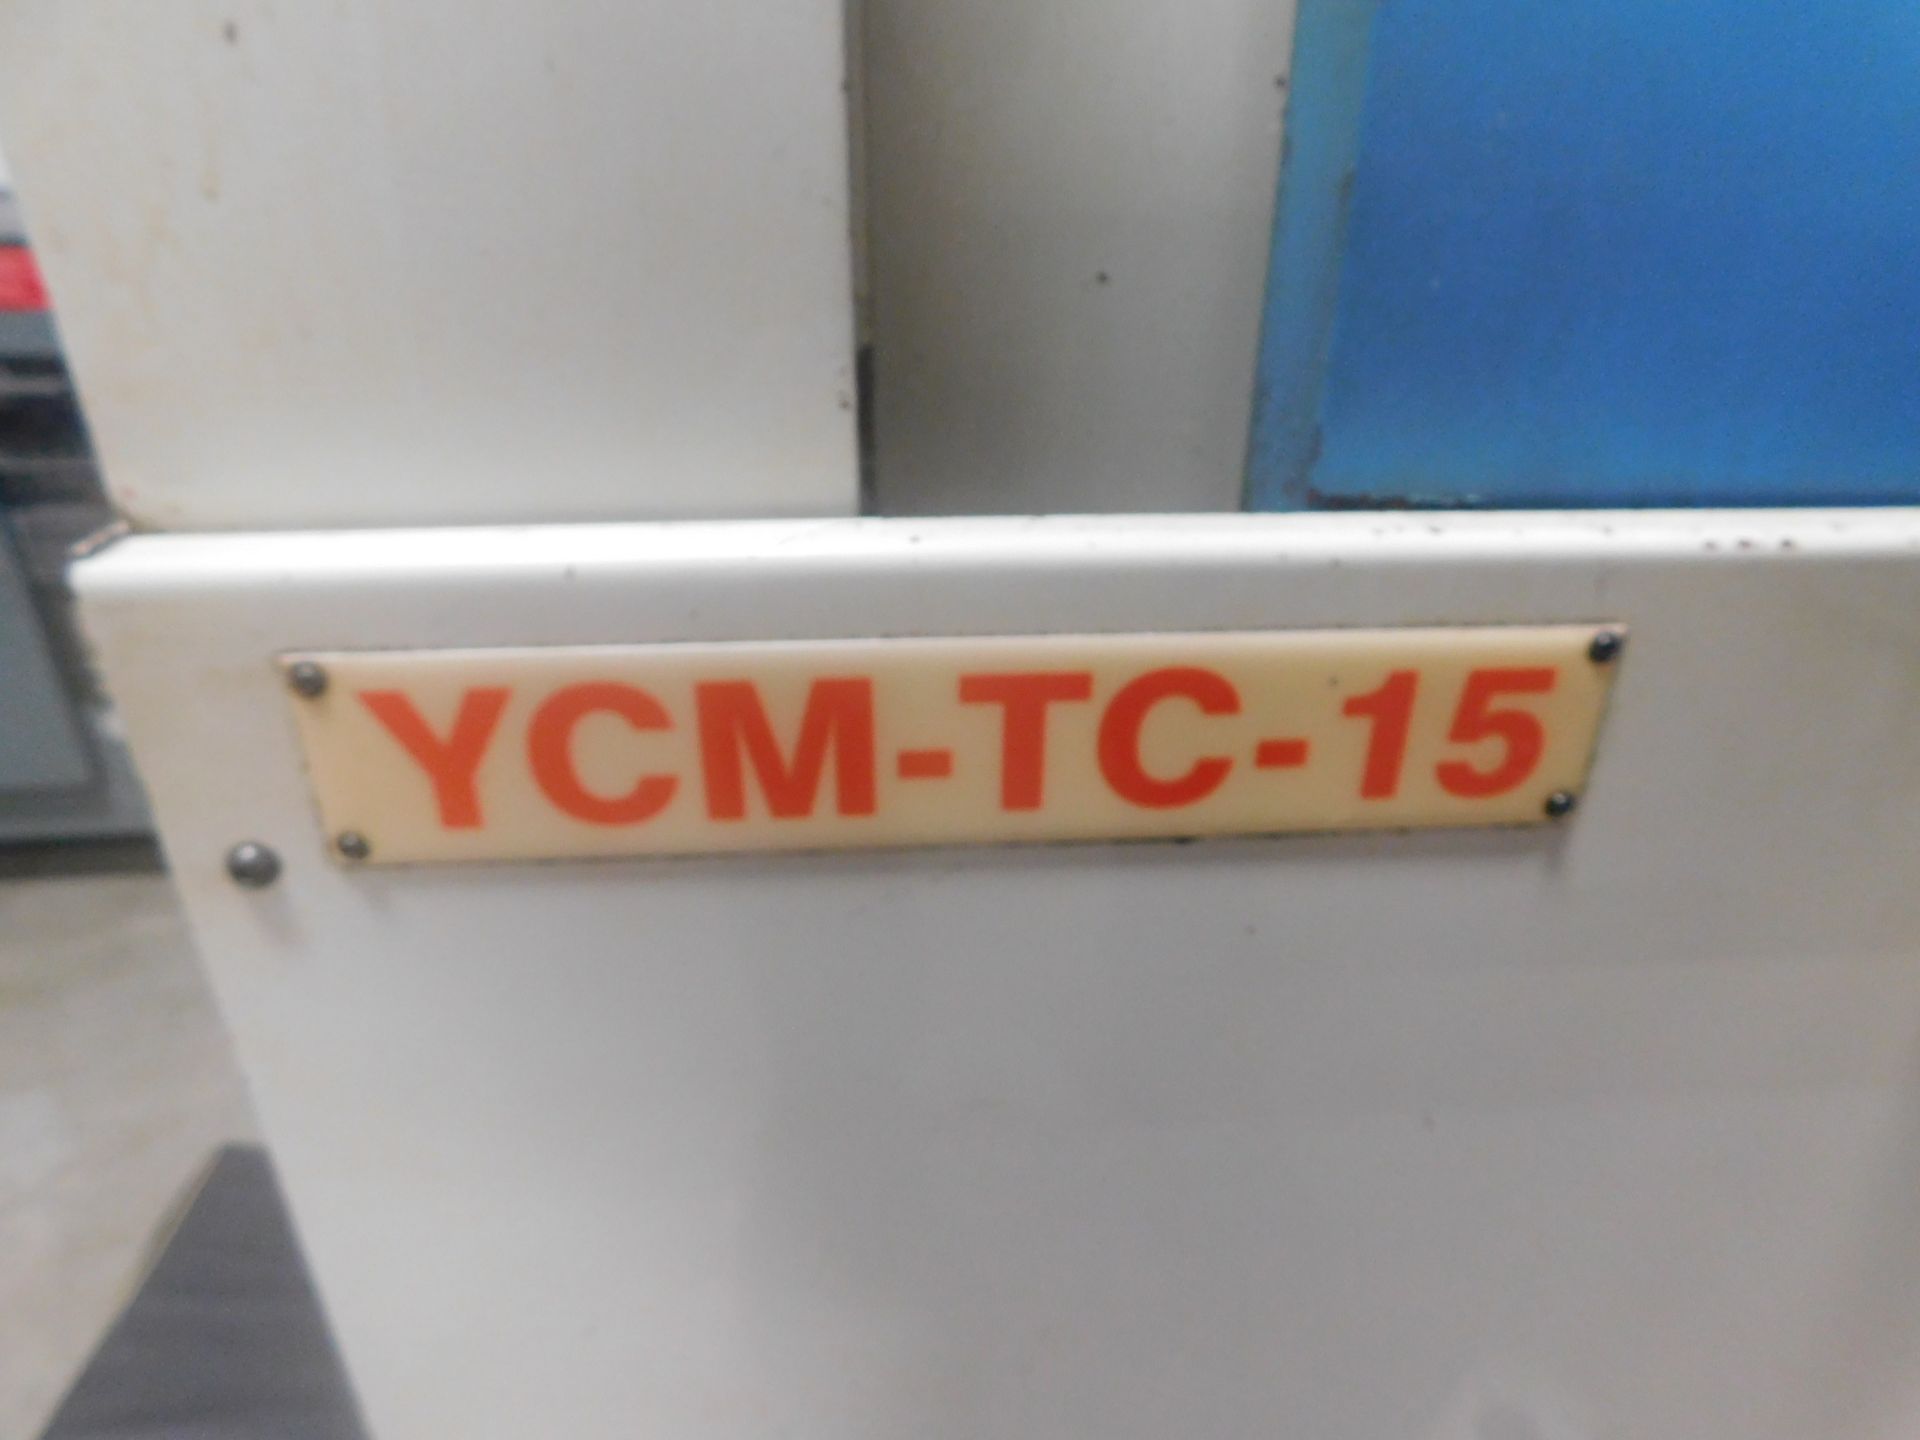 Supermax Model YCM-TC-15 CNC Turning Center, SN 025028, with Fanuc Series O-T CNC Control, 8" 3- - Image 13 of 13